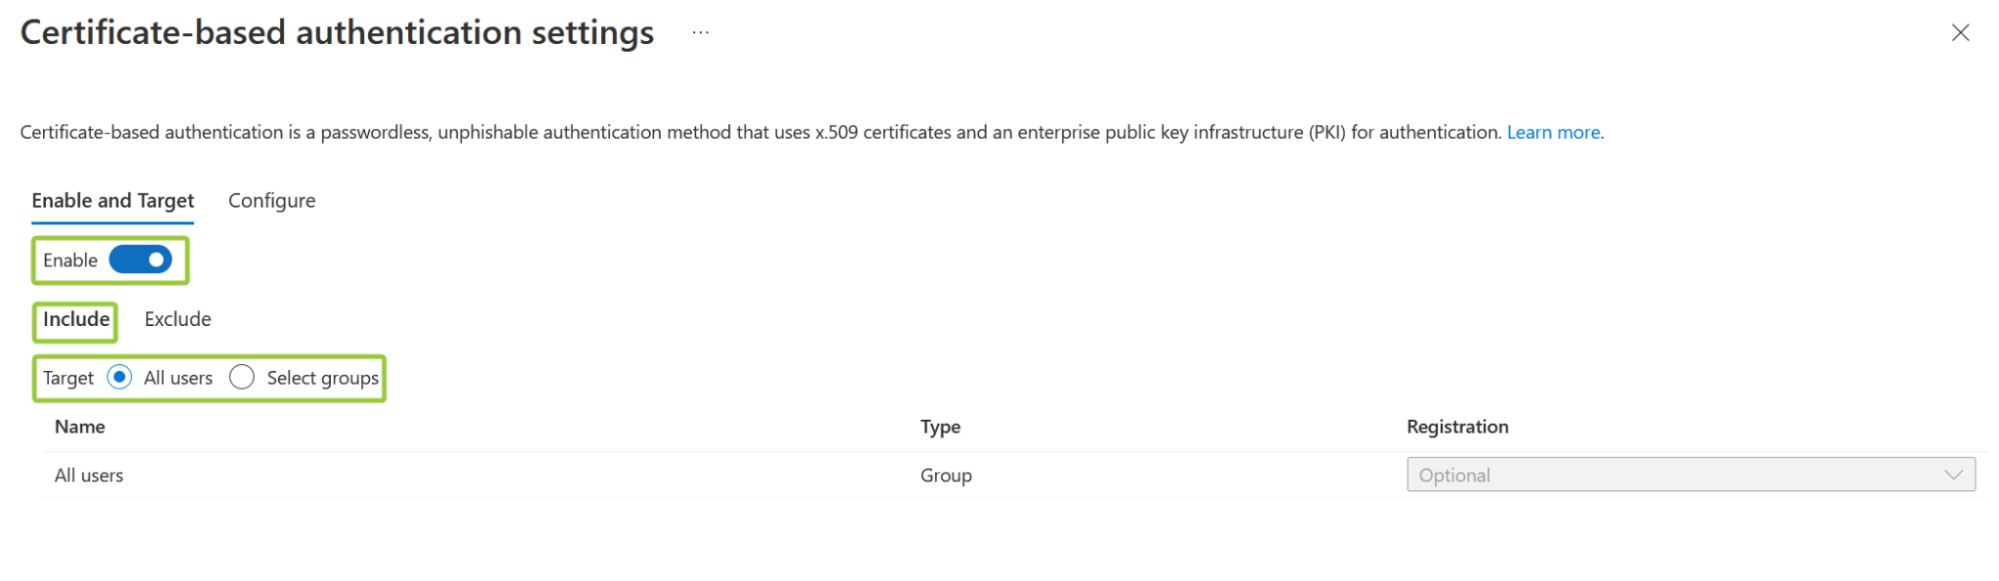 Enable_Azure_AD_Certificate_Based_Authentication_4.png